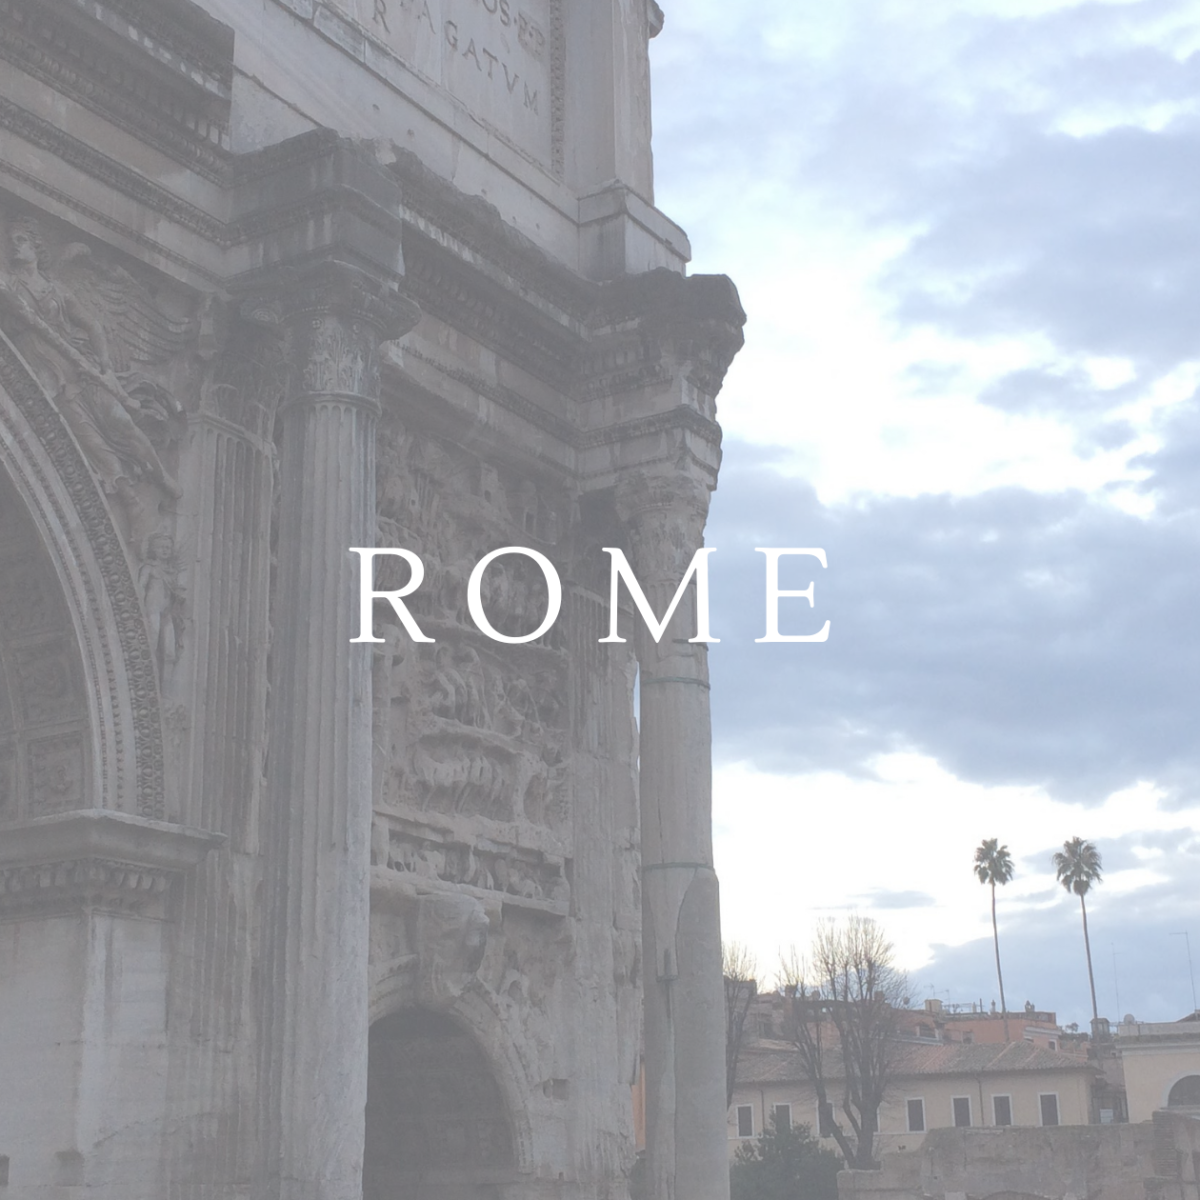 11 Things to Know When Going to Rome